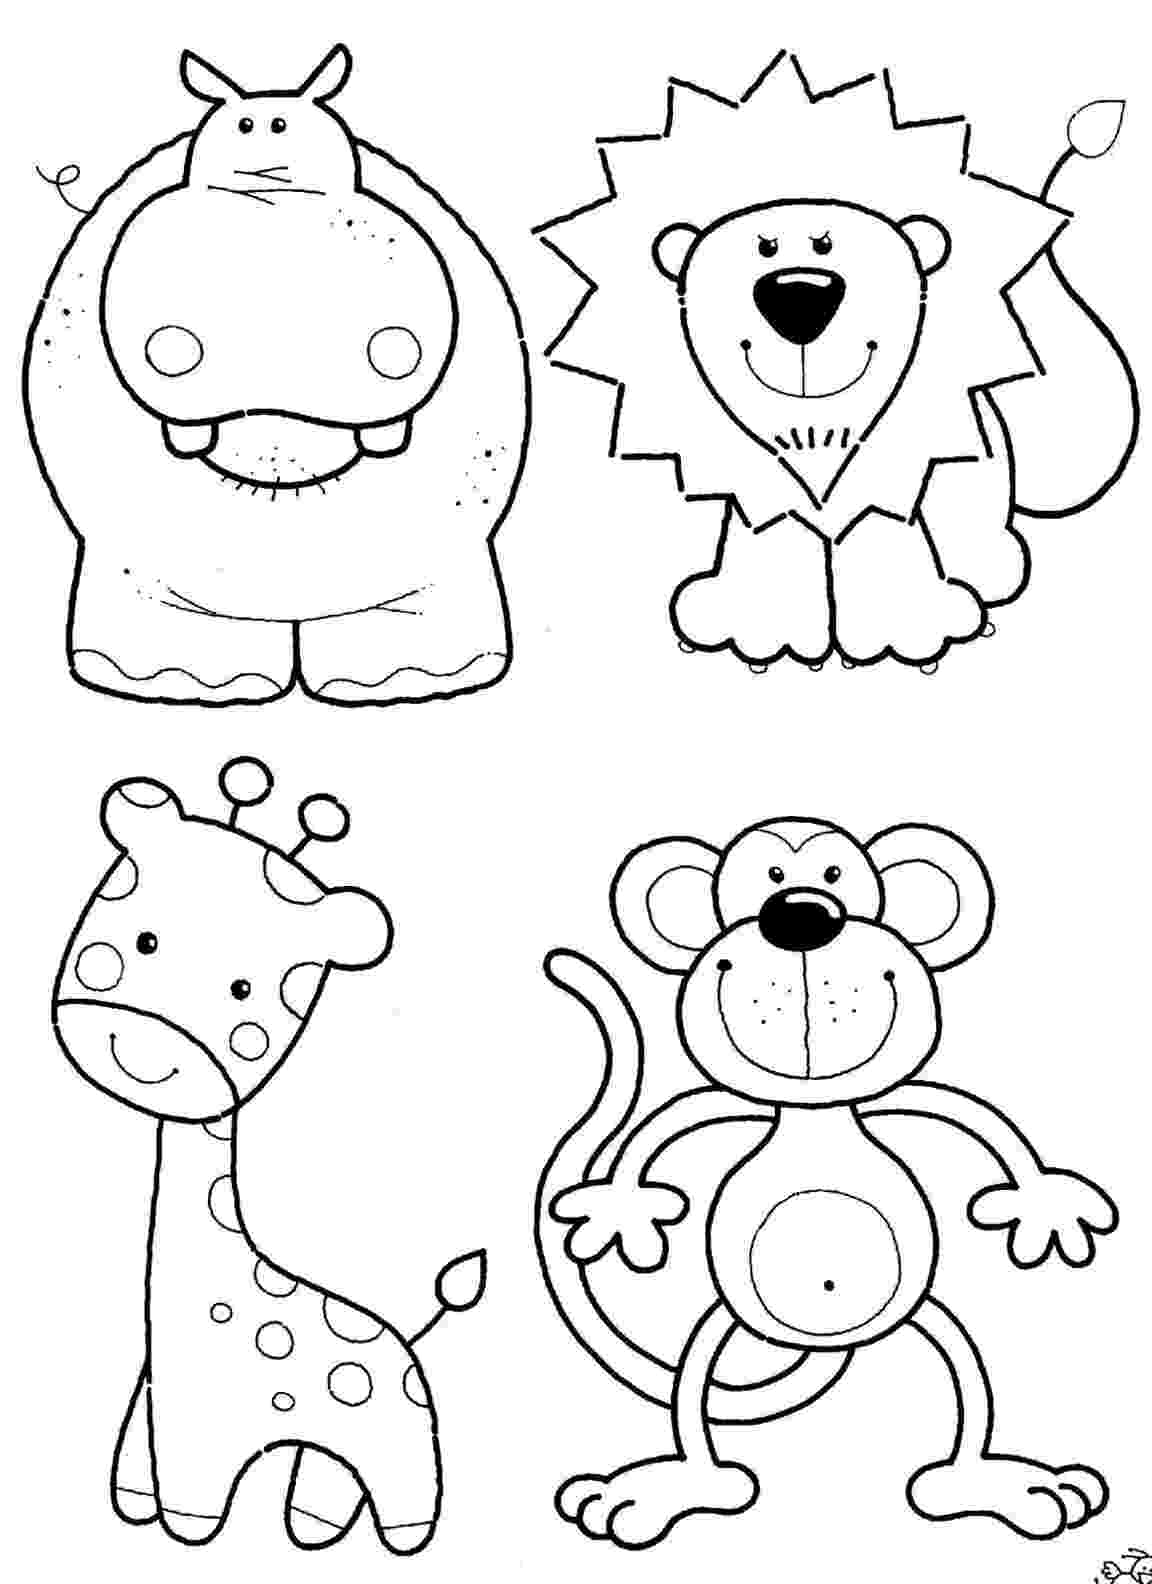 printable coloring pages of jungle animals jungle coloring pages best coloring pages for kids printable coloring animals of pages jungle 